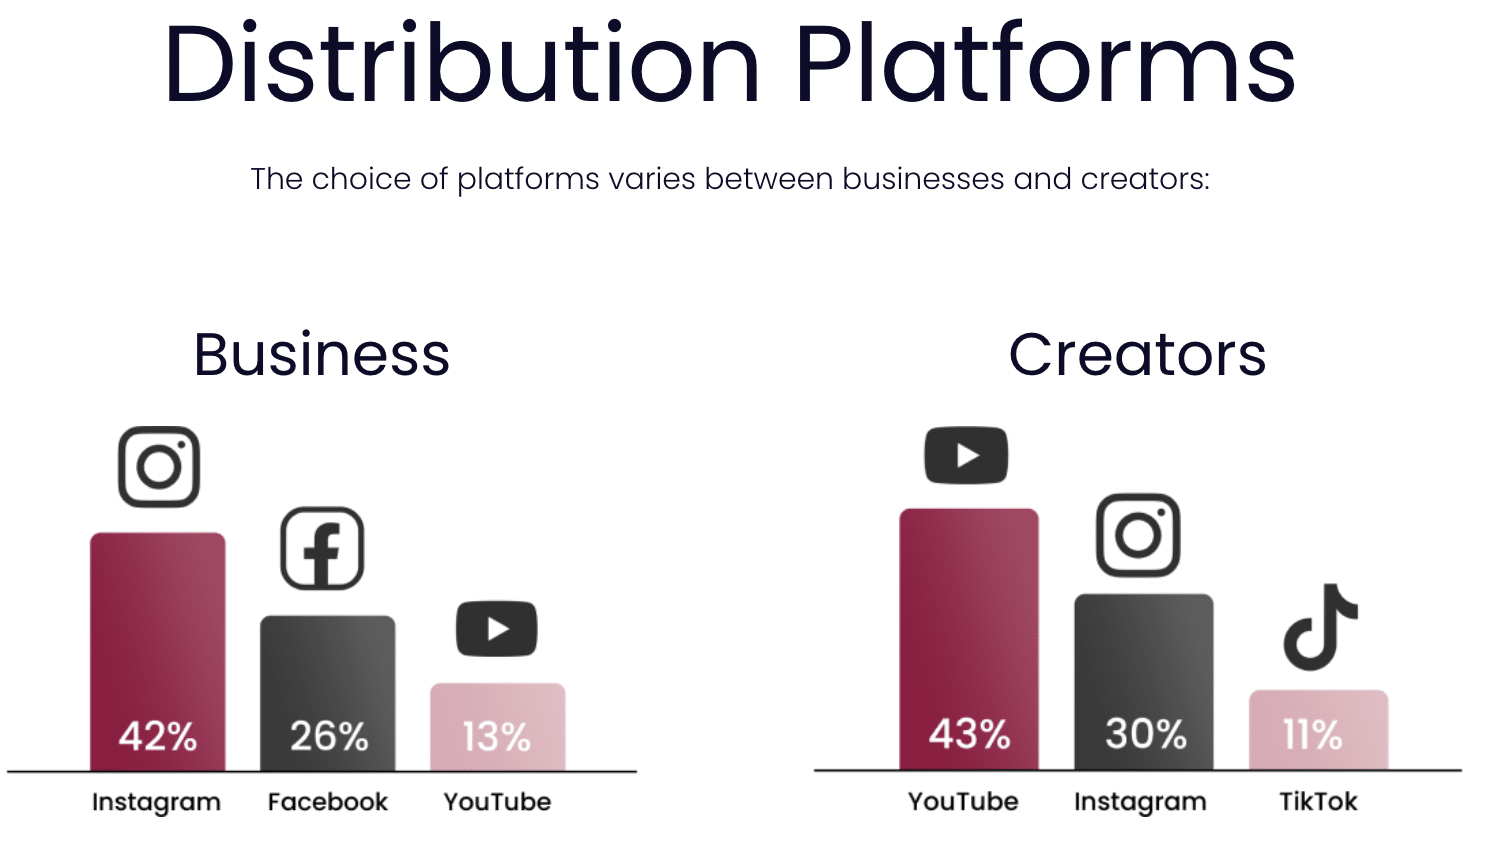 Instagram and YouTube remain the primary choices for both businesses and creators. 